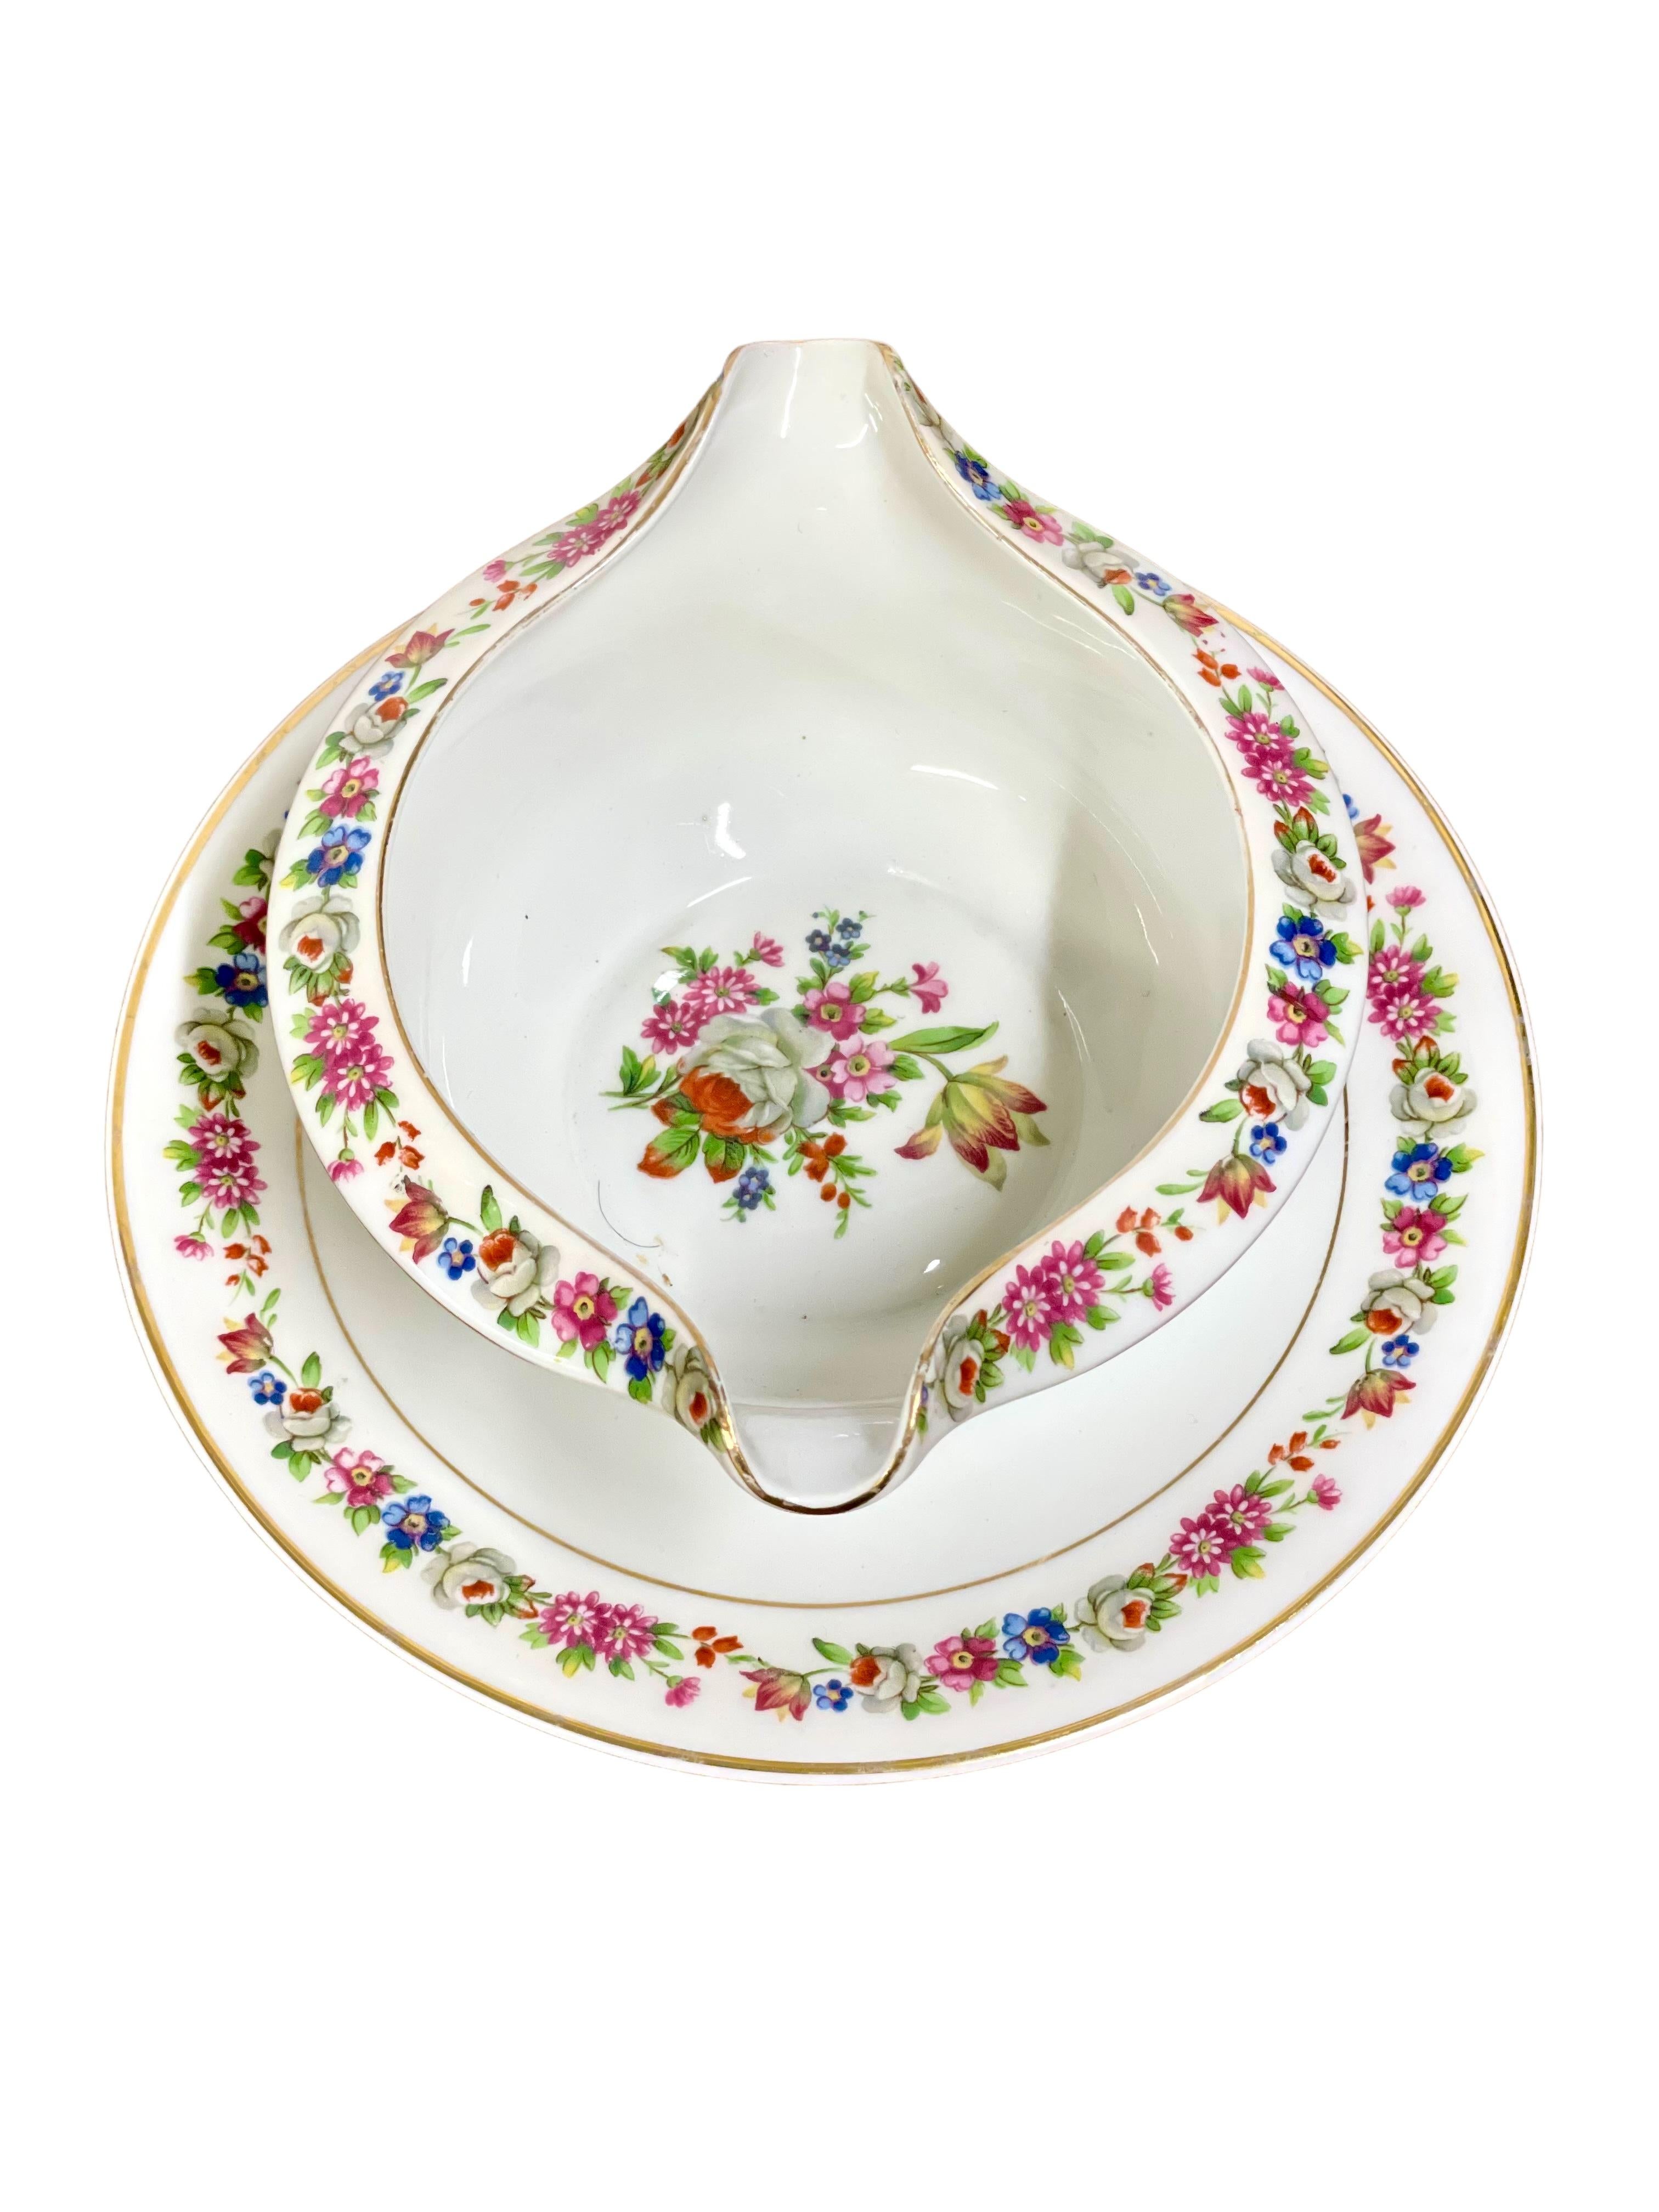 Dinner Service in Limoges Porcelain by Raynaud & Cie In Good Condition For Sale In LA CIOTAT, FR